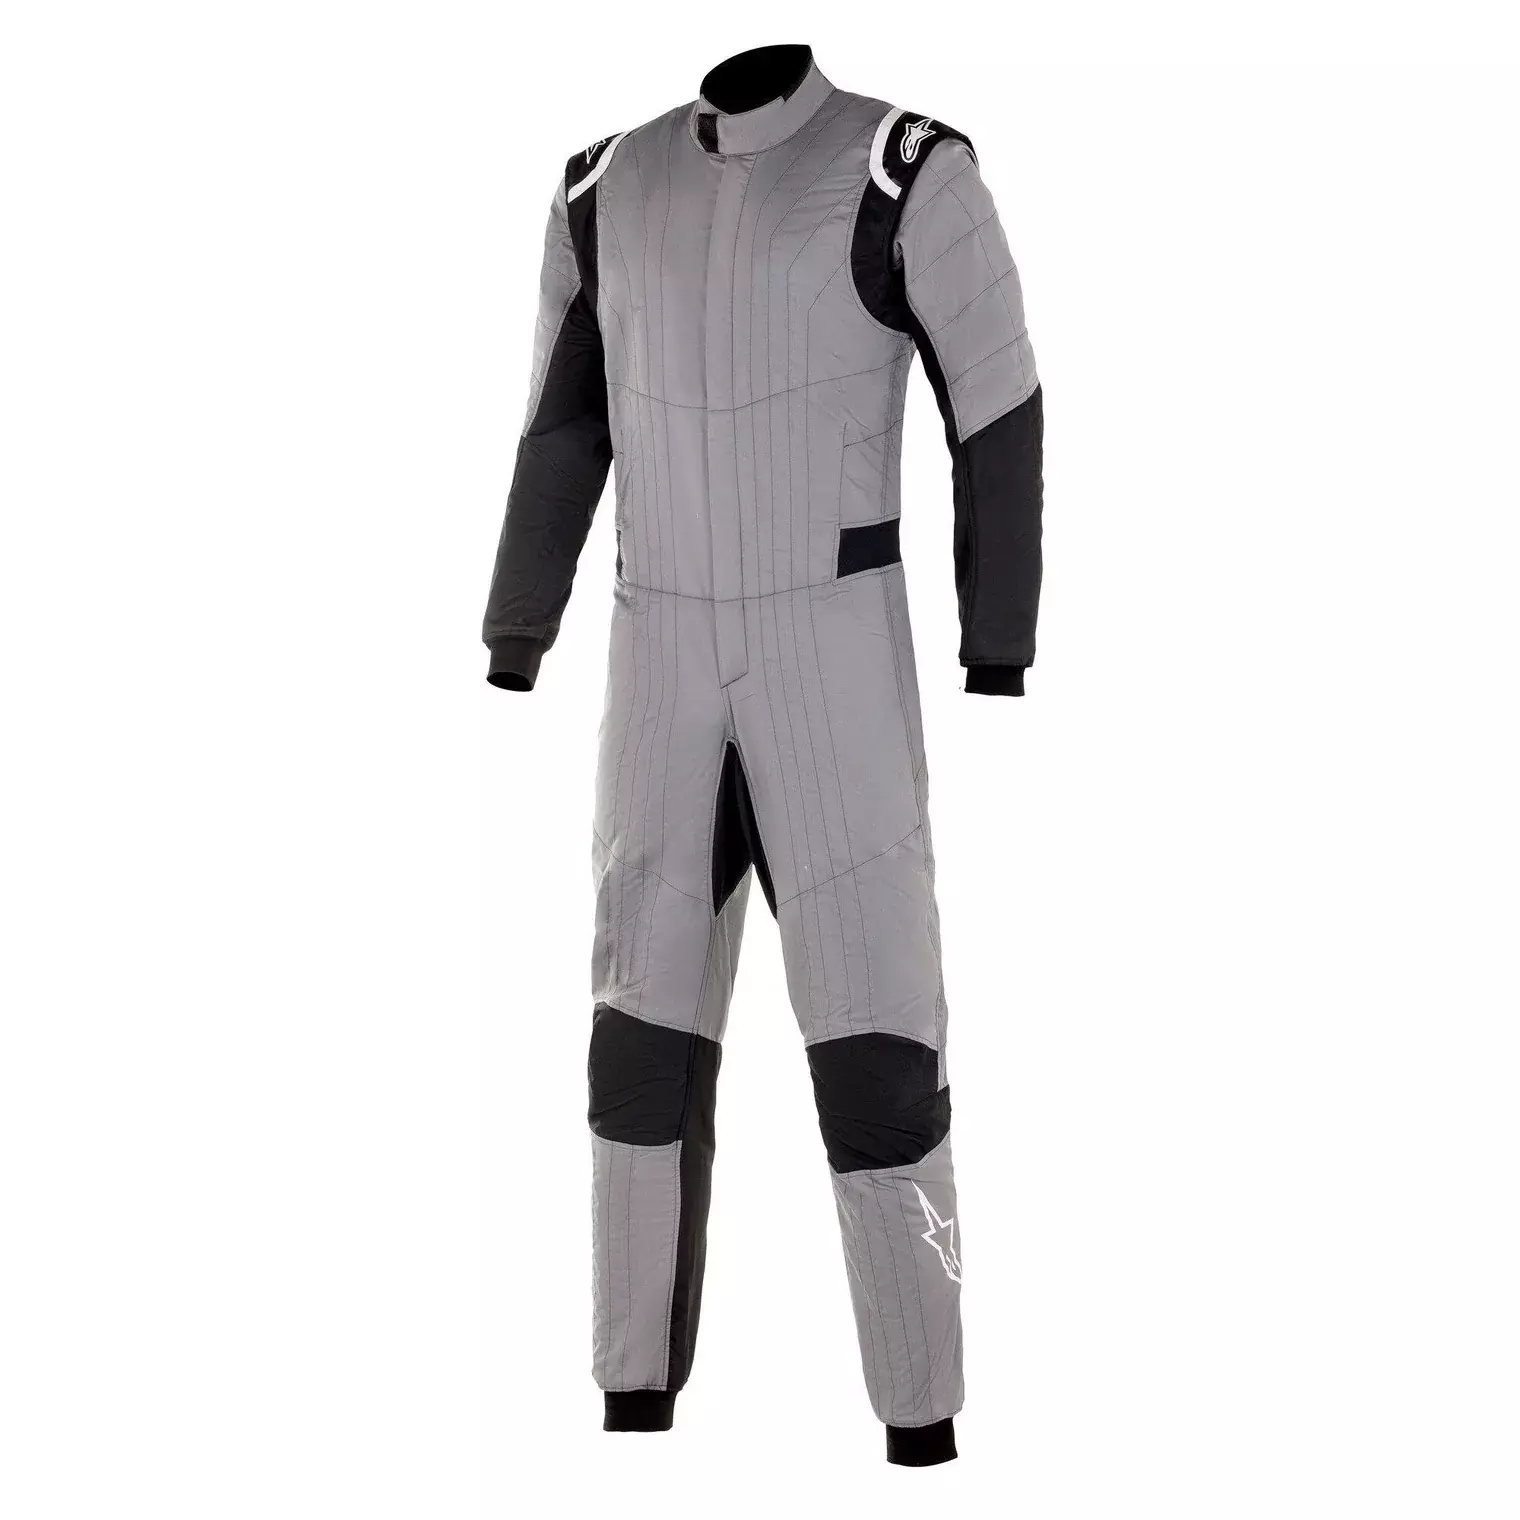 Alpinestars 3350220-971-56 Driving Suit, Hypertech V2, 1-Piece, FIA Approved, Double Layer, Fire Retardant Fabric, Gray / Black, Large, Each